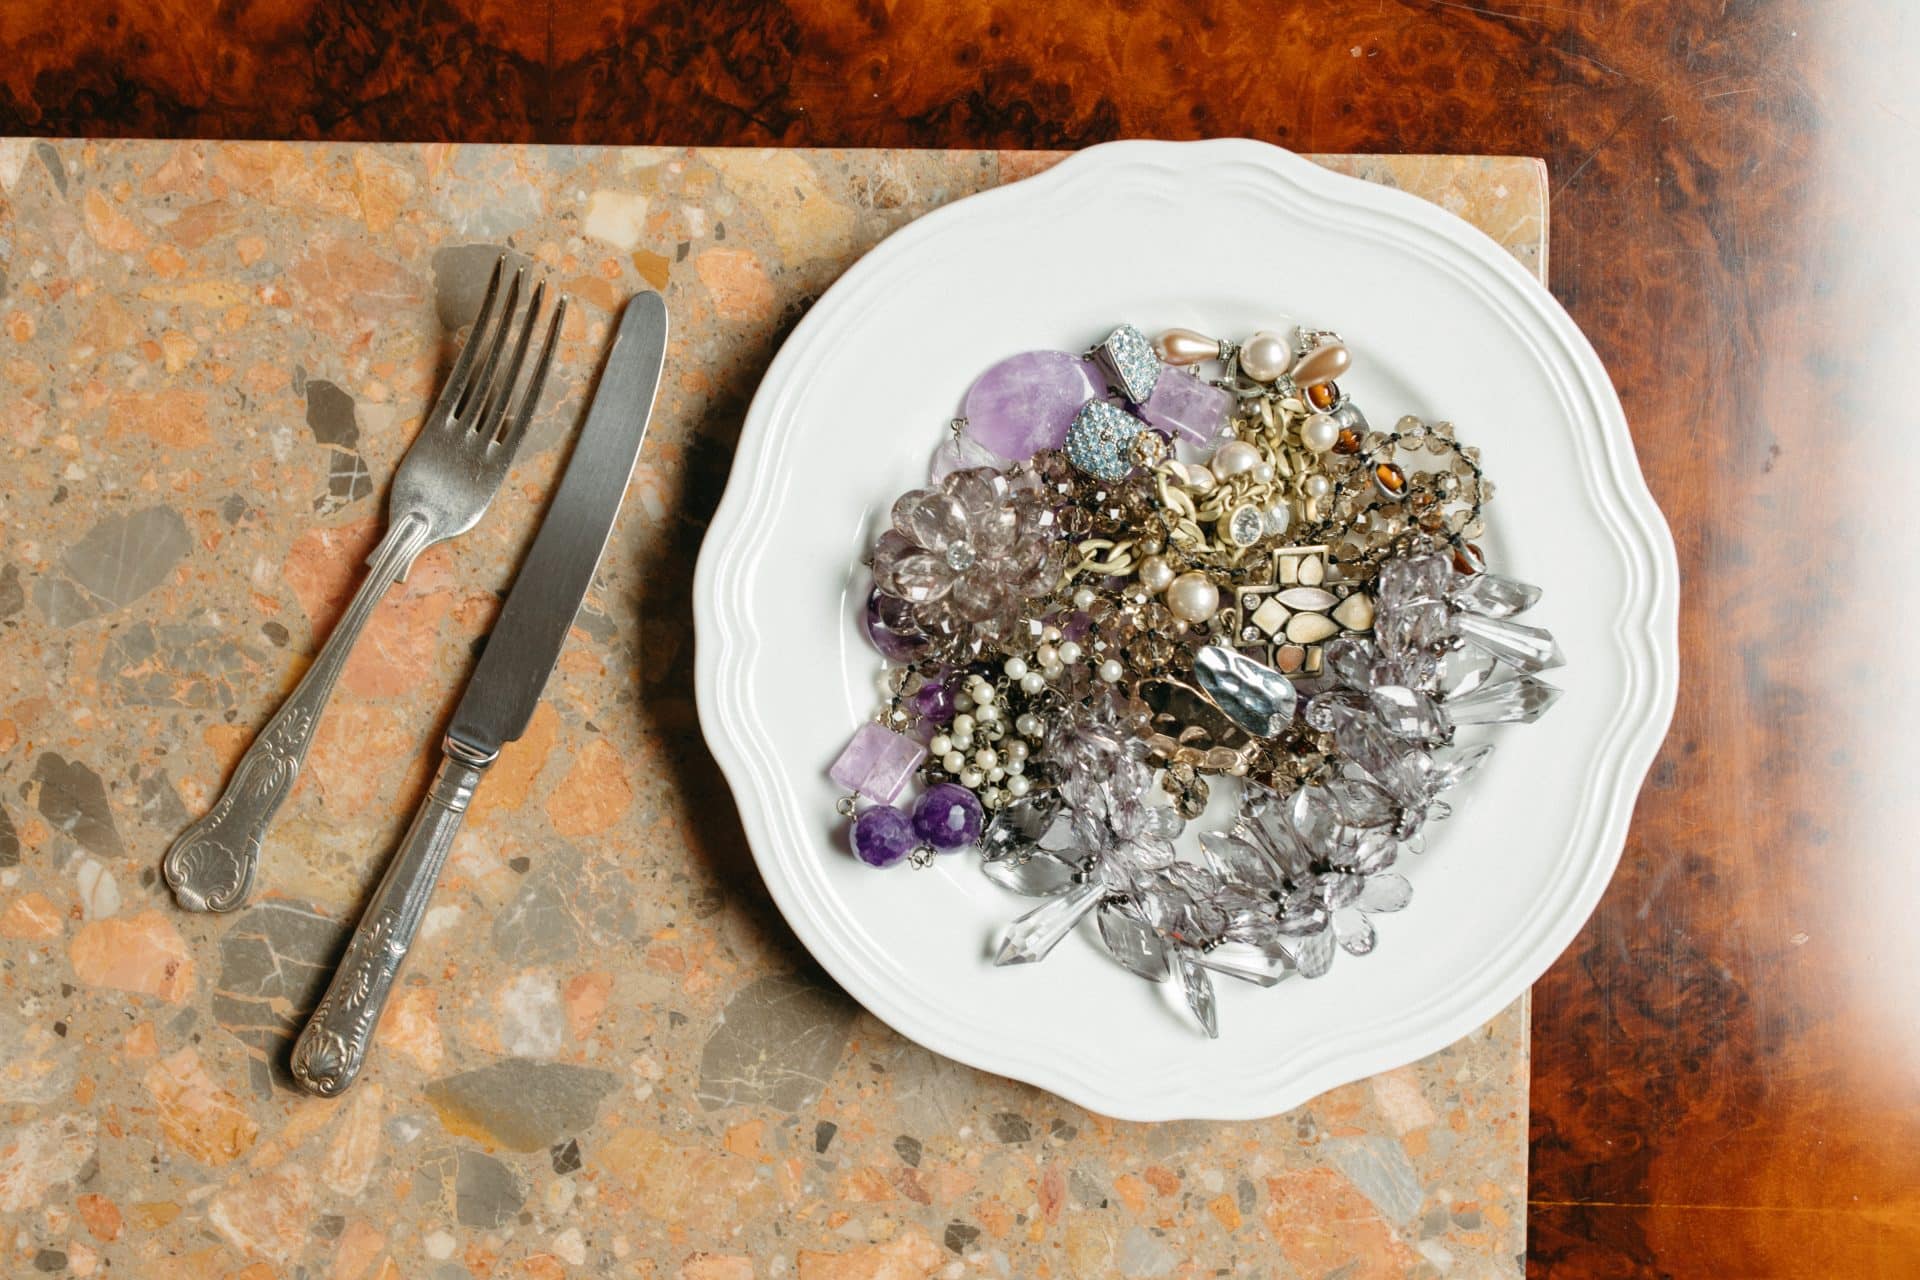 What Crystals Should Be in the Kitchen?